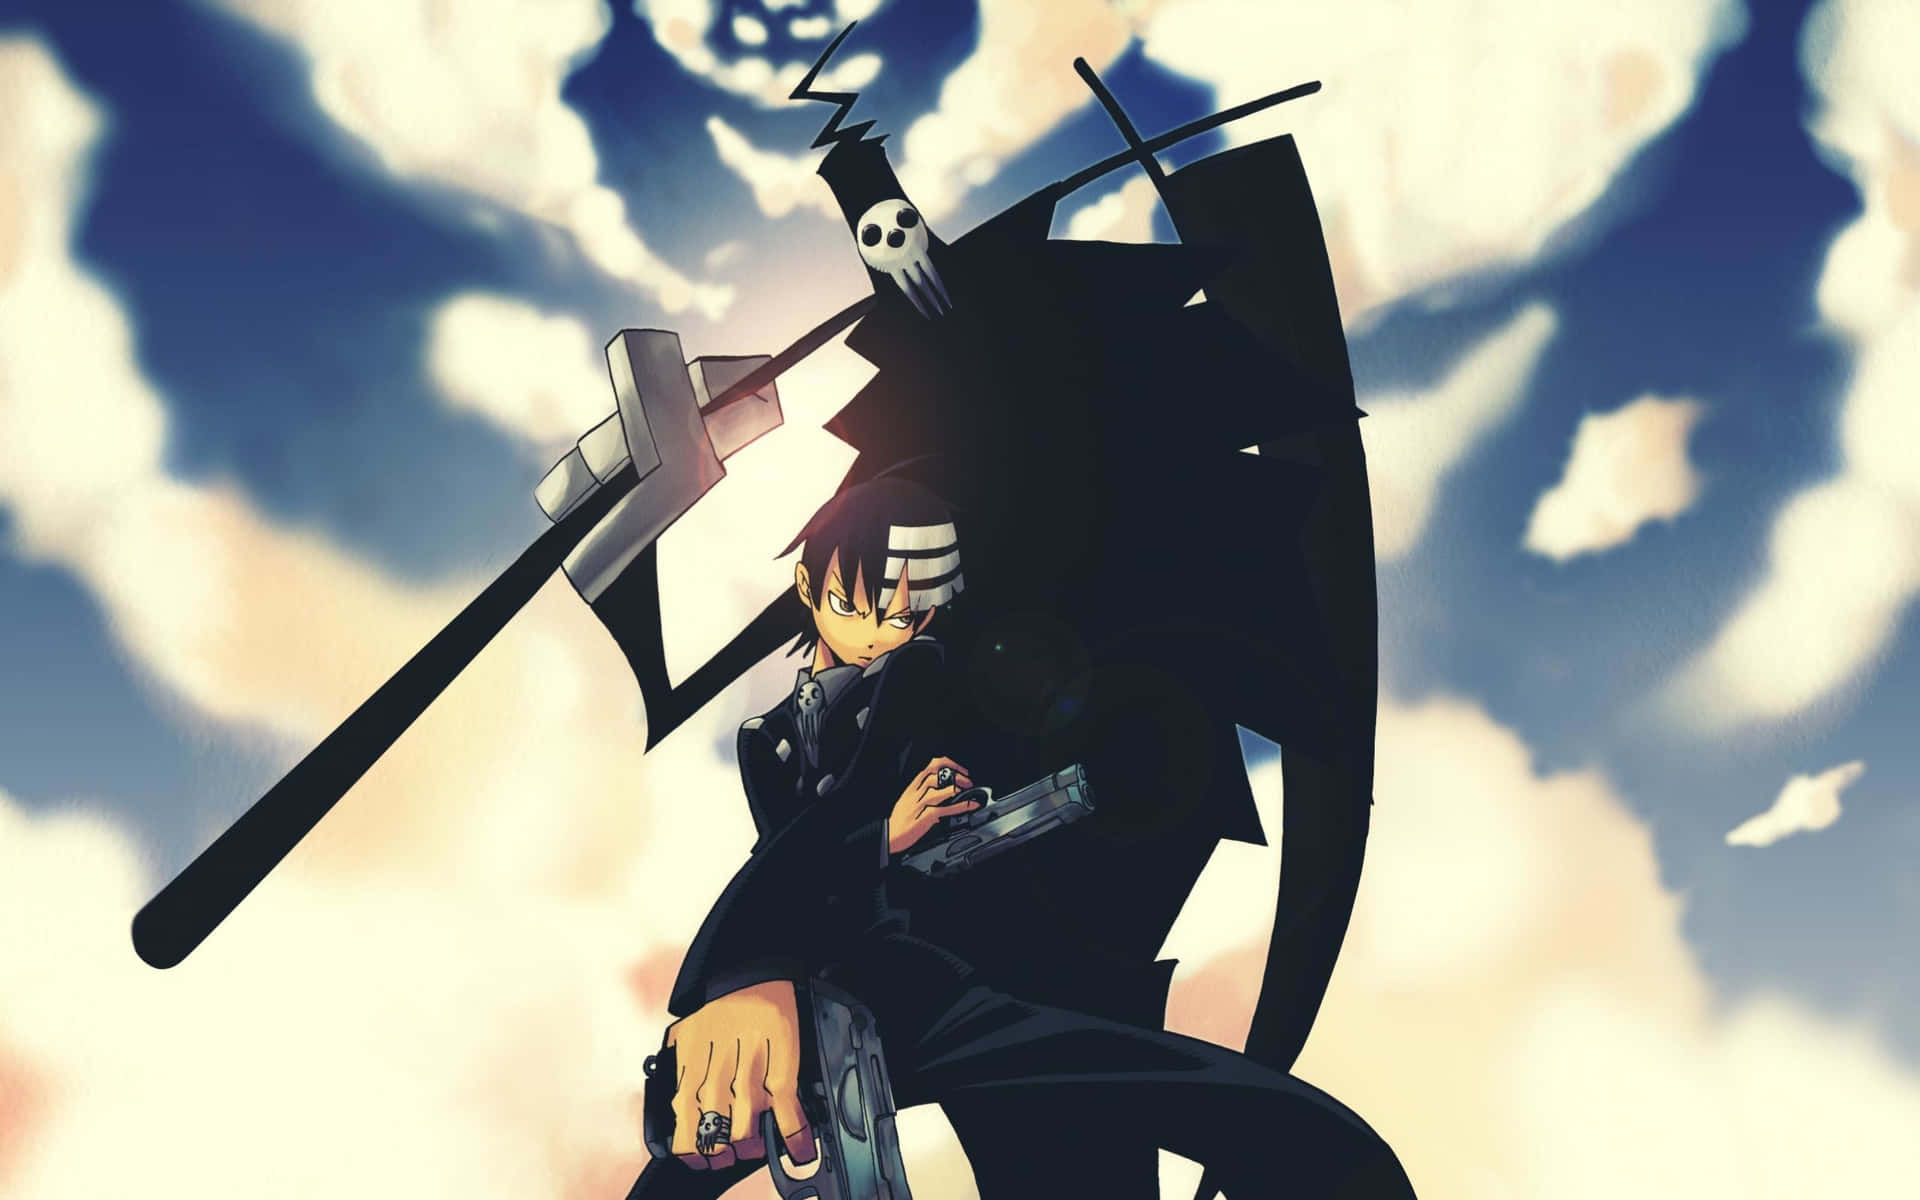 Soul Eater - Death The Kid In Action Wallpaper